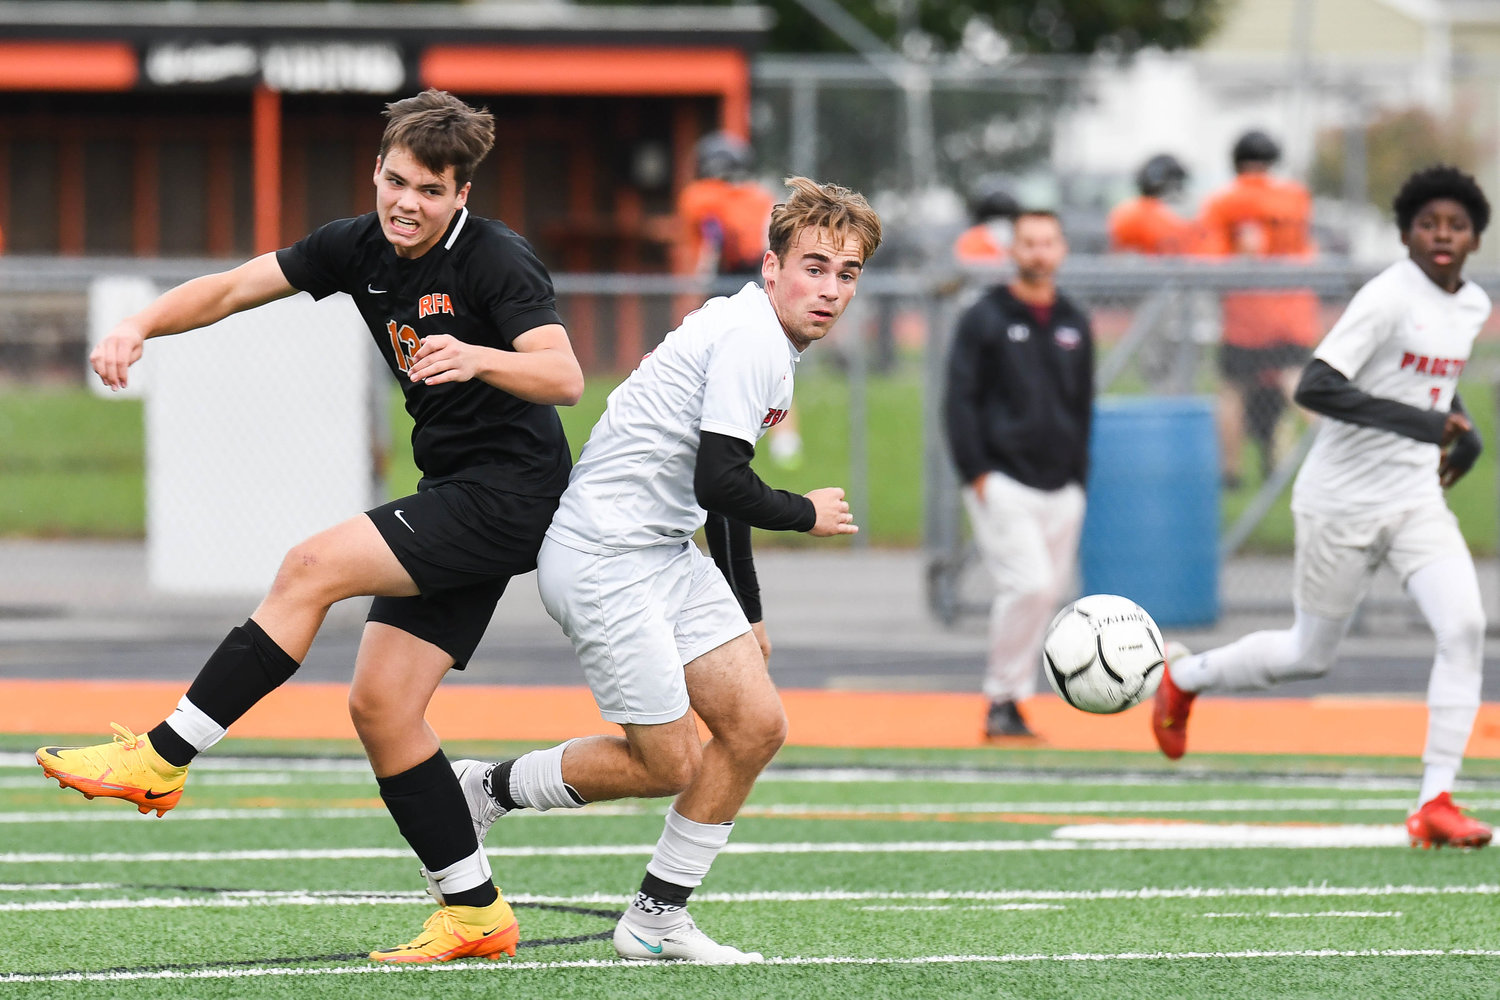 Rome Free Academy's Cooper Engelbert, left, and Proctor player Andrew Dischiavo fight for control of a loose ball during the game on Tuesday at RFA Stadium. Proctor won 4-0.